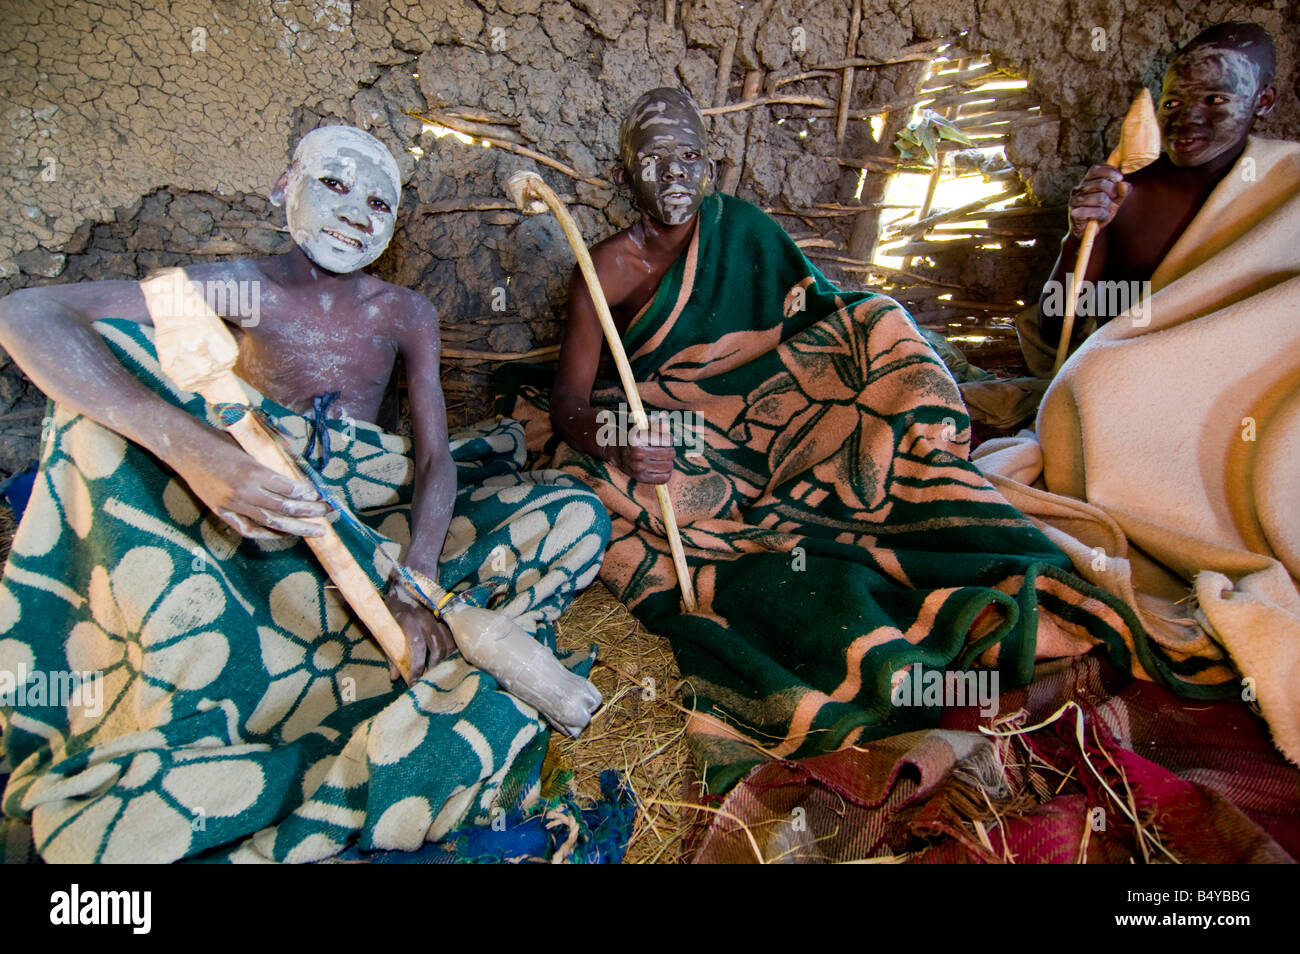 Ceremony, Transkei, Eastern Cape, South Africa Stock Photo